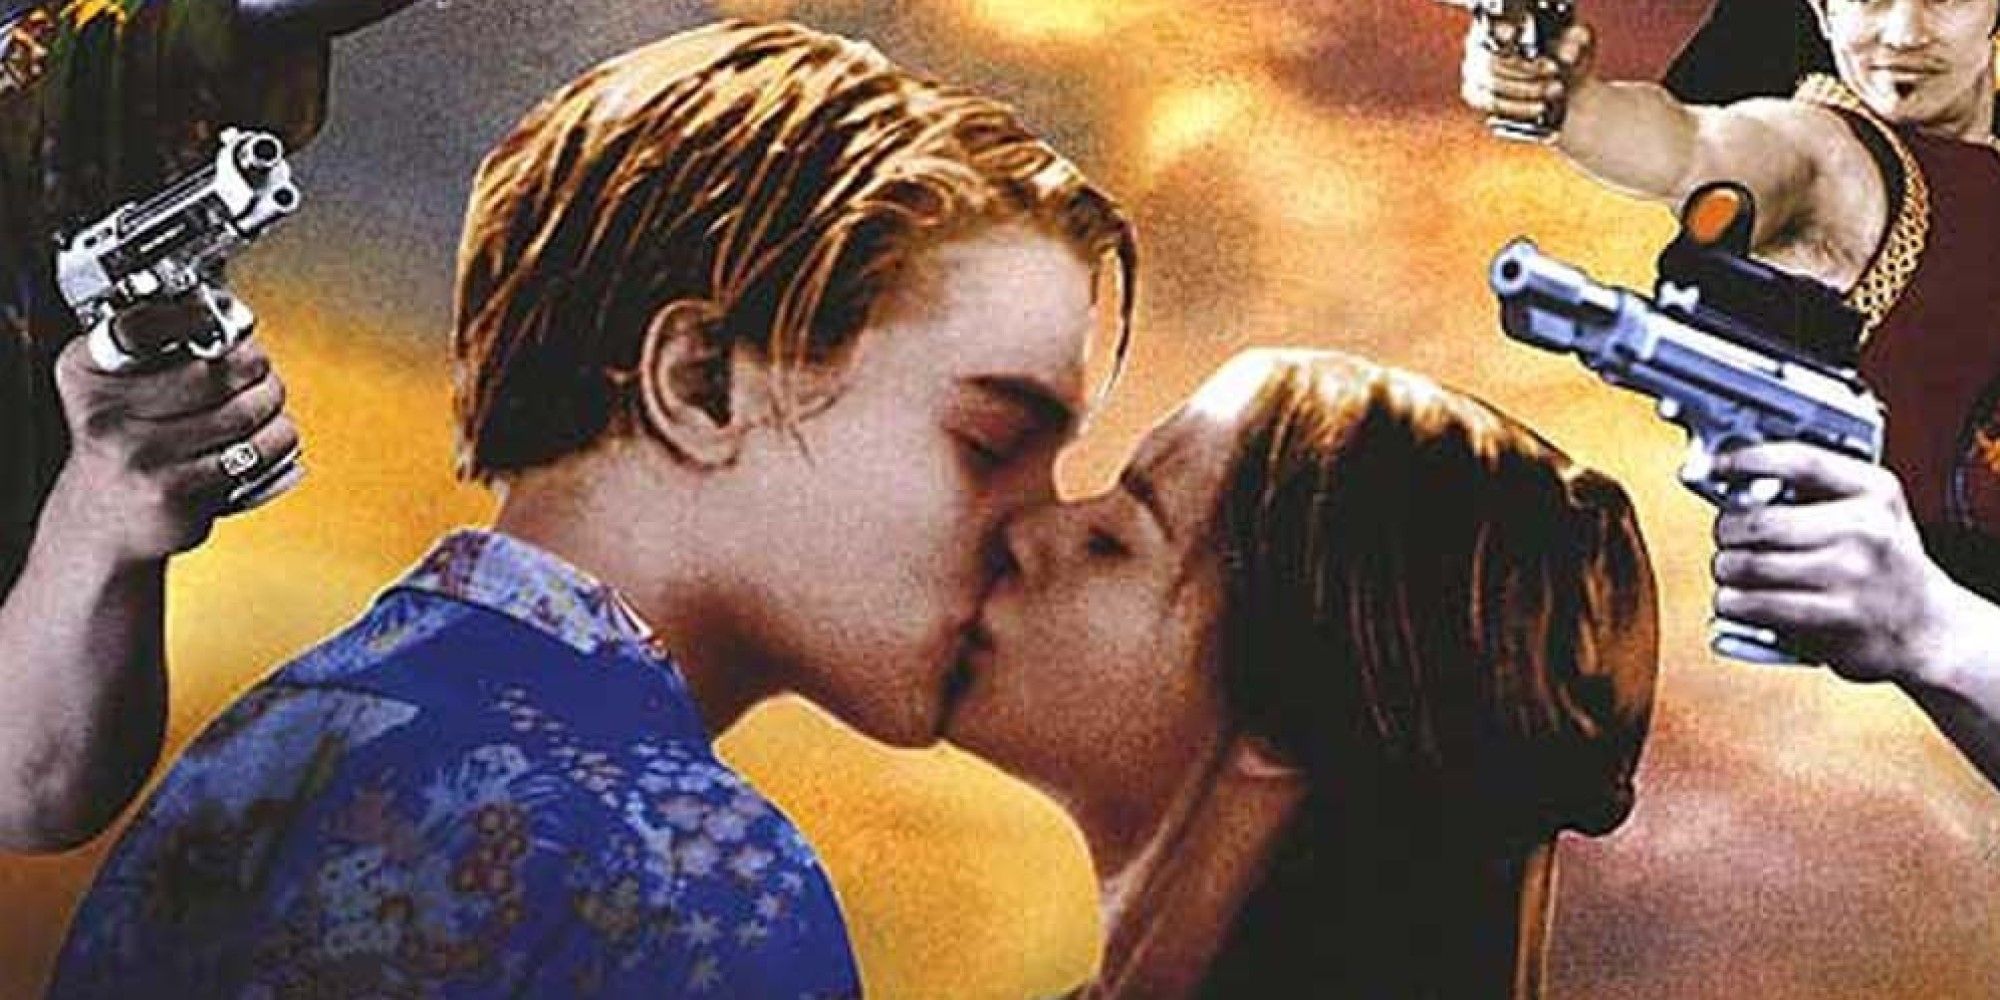 An image of Romeo and Juliet kissing in the 1996 movie